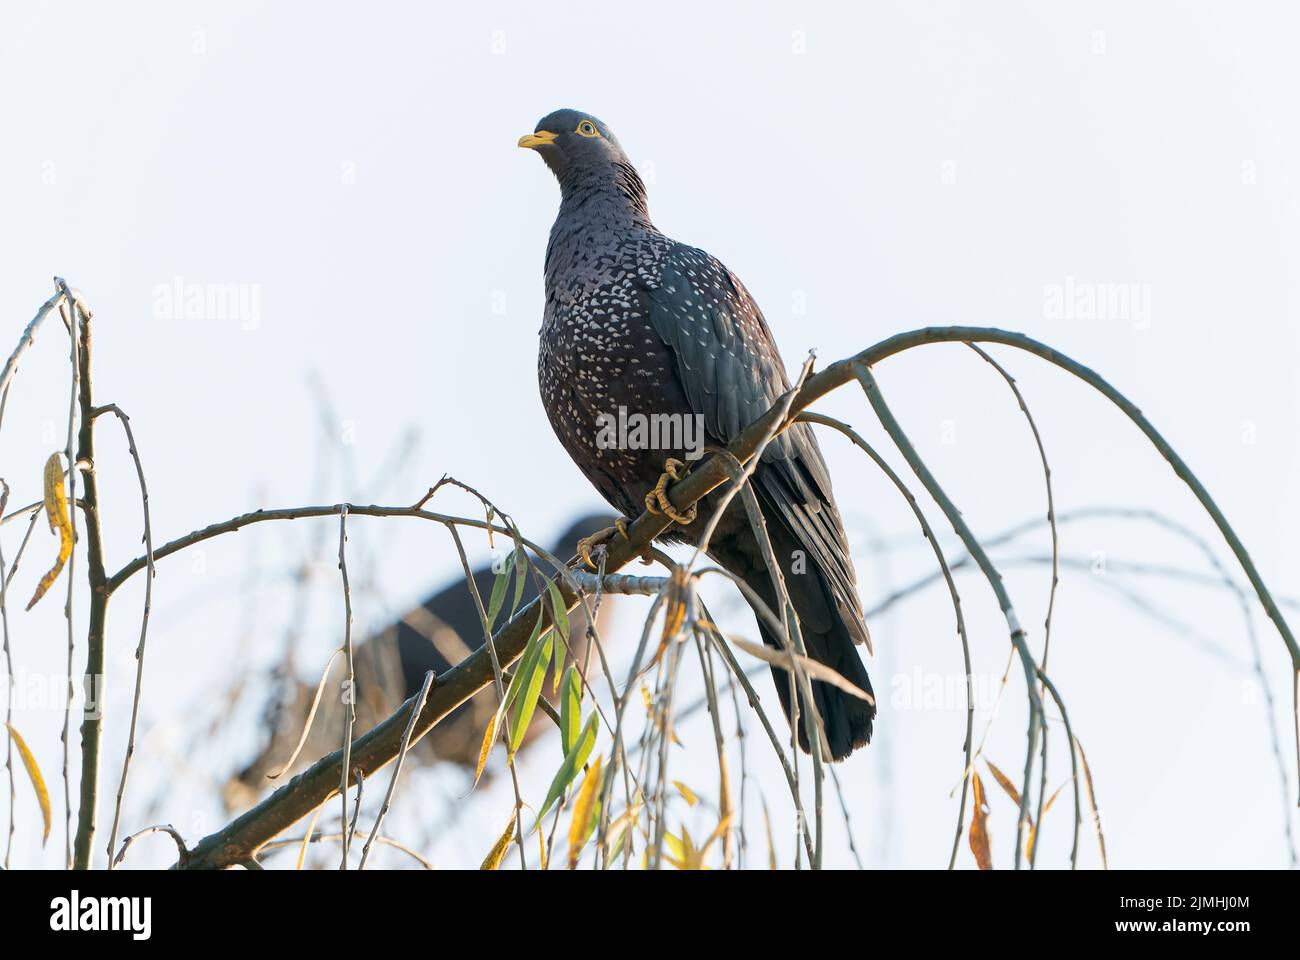 African olive pigeon, Columba arquatrix, single adult perched in tree, Johannesburg, South Africa Stock Photo